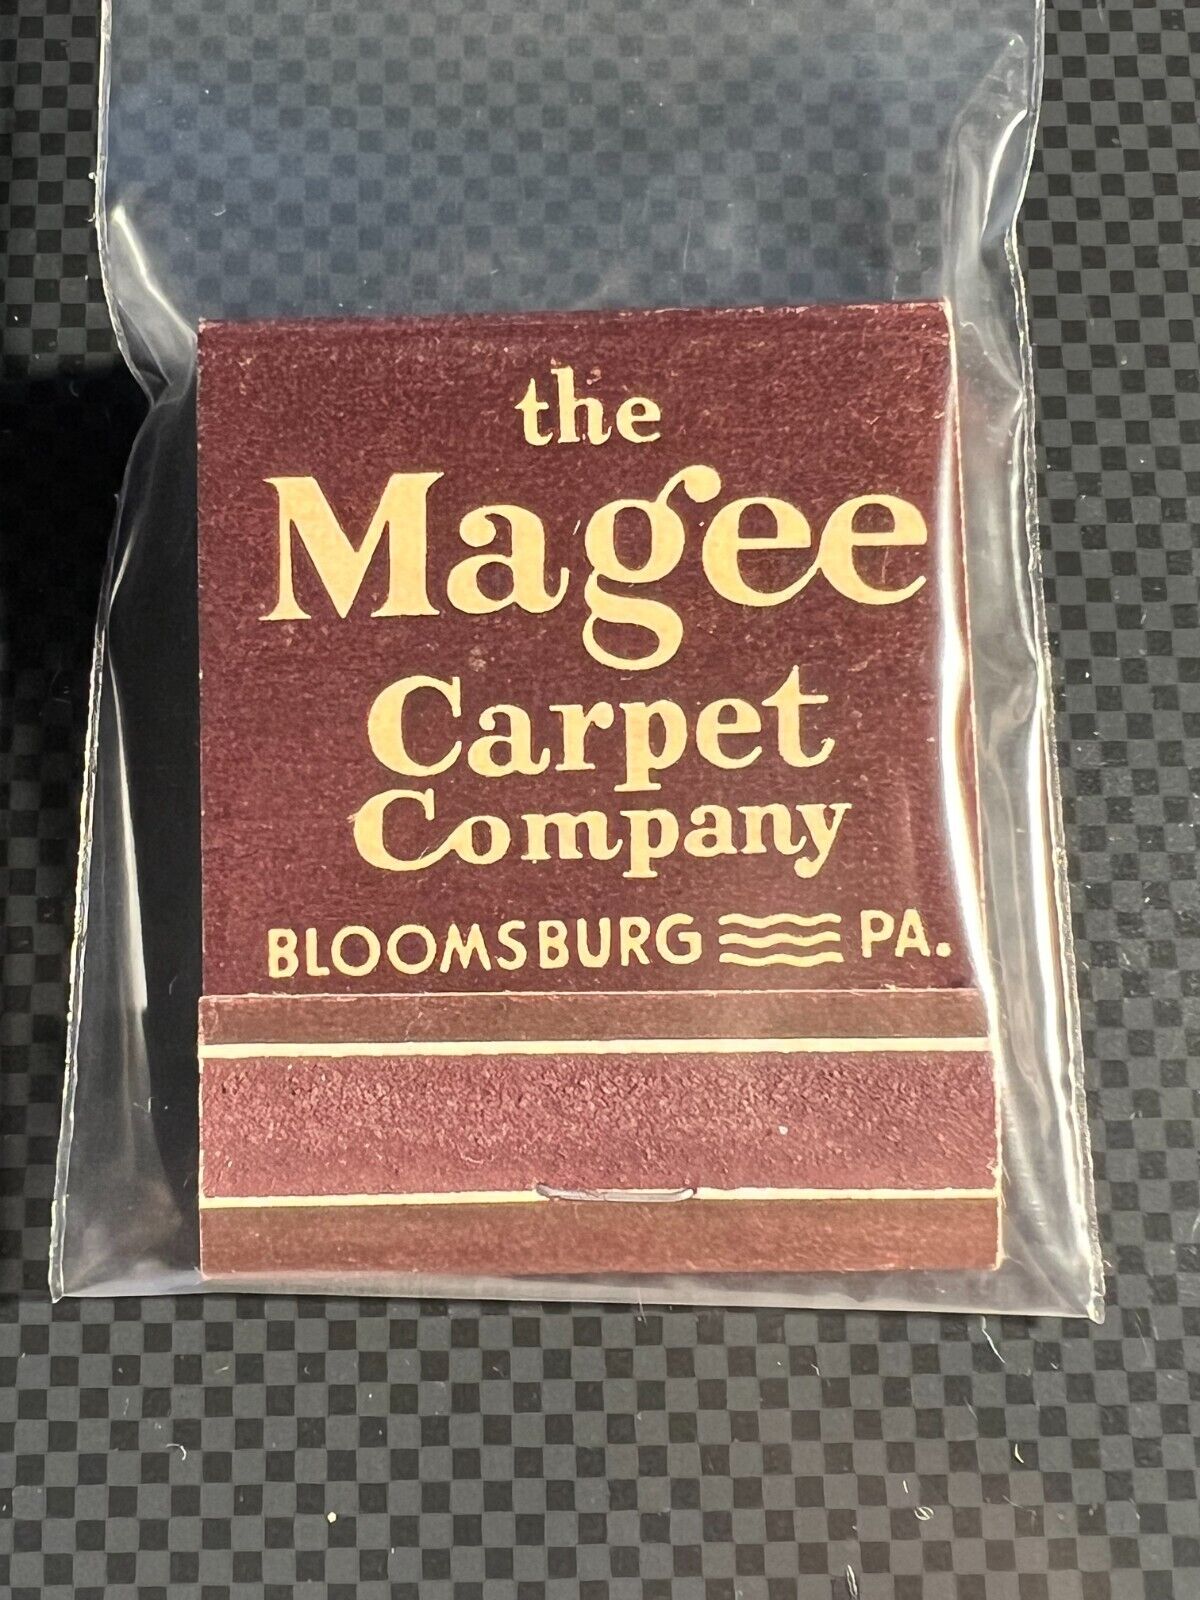 VINTAGE MATCHBOOK - THE MAGEE CARPET COMPANY - BLOOMSBURG, PA - UNSTRUCK